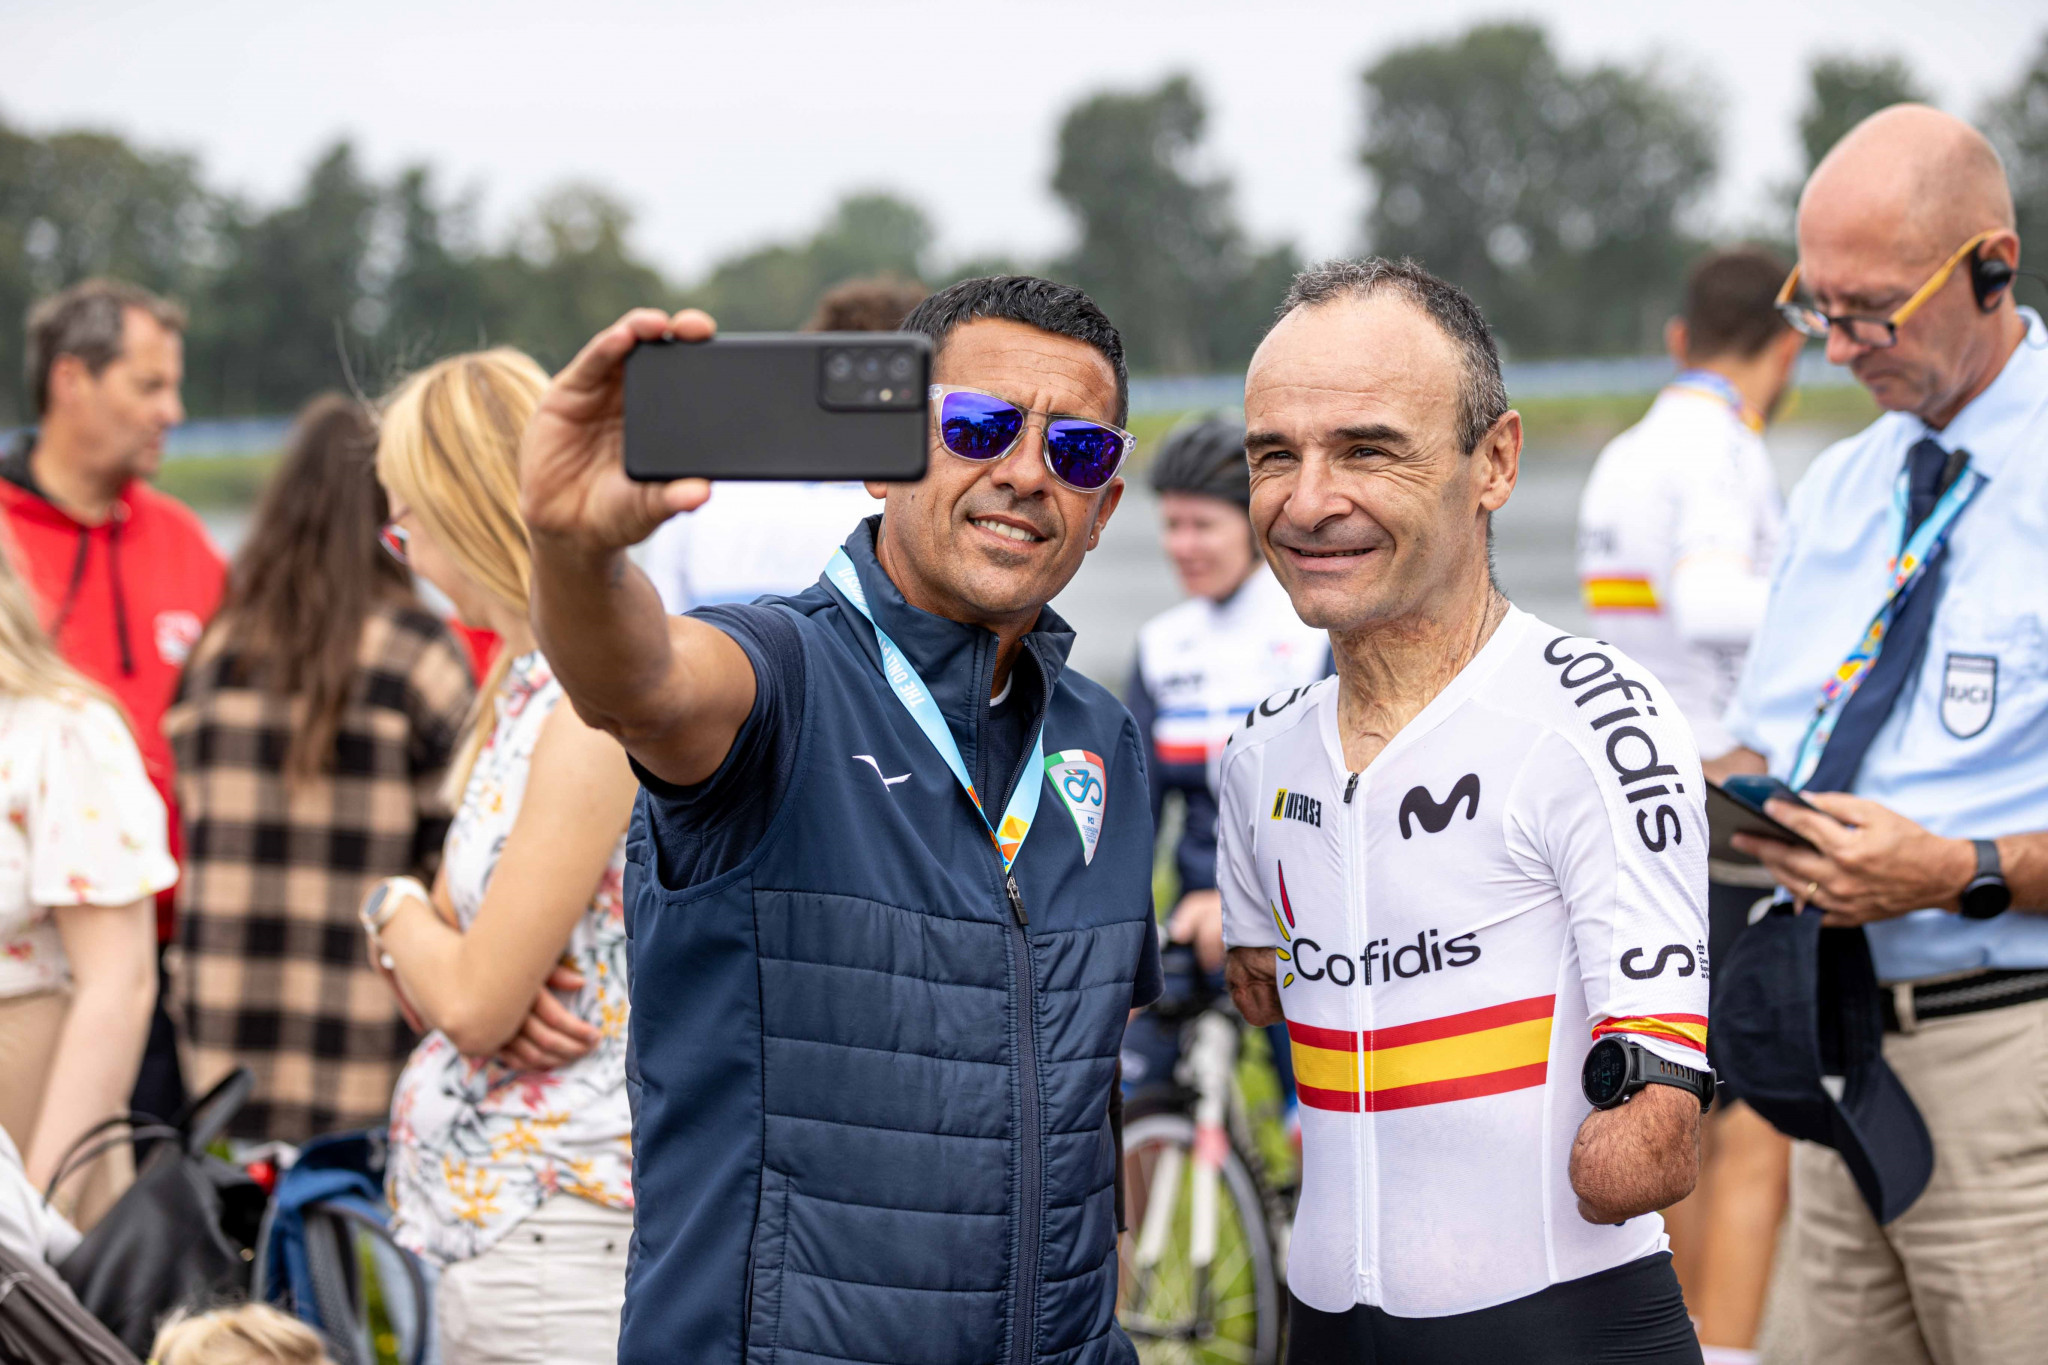 Spain's Ricardo Ten Argiles, right, the winner of the men's C1 title, takes time to have a picture as fans flocked to watch the Para cycling races ©EPC